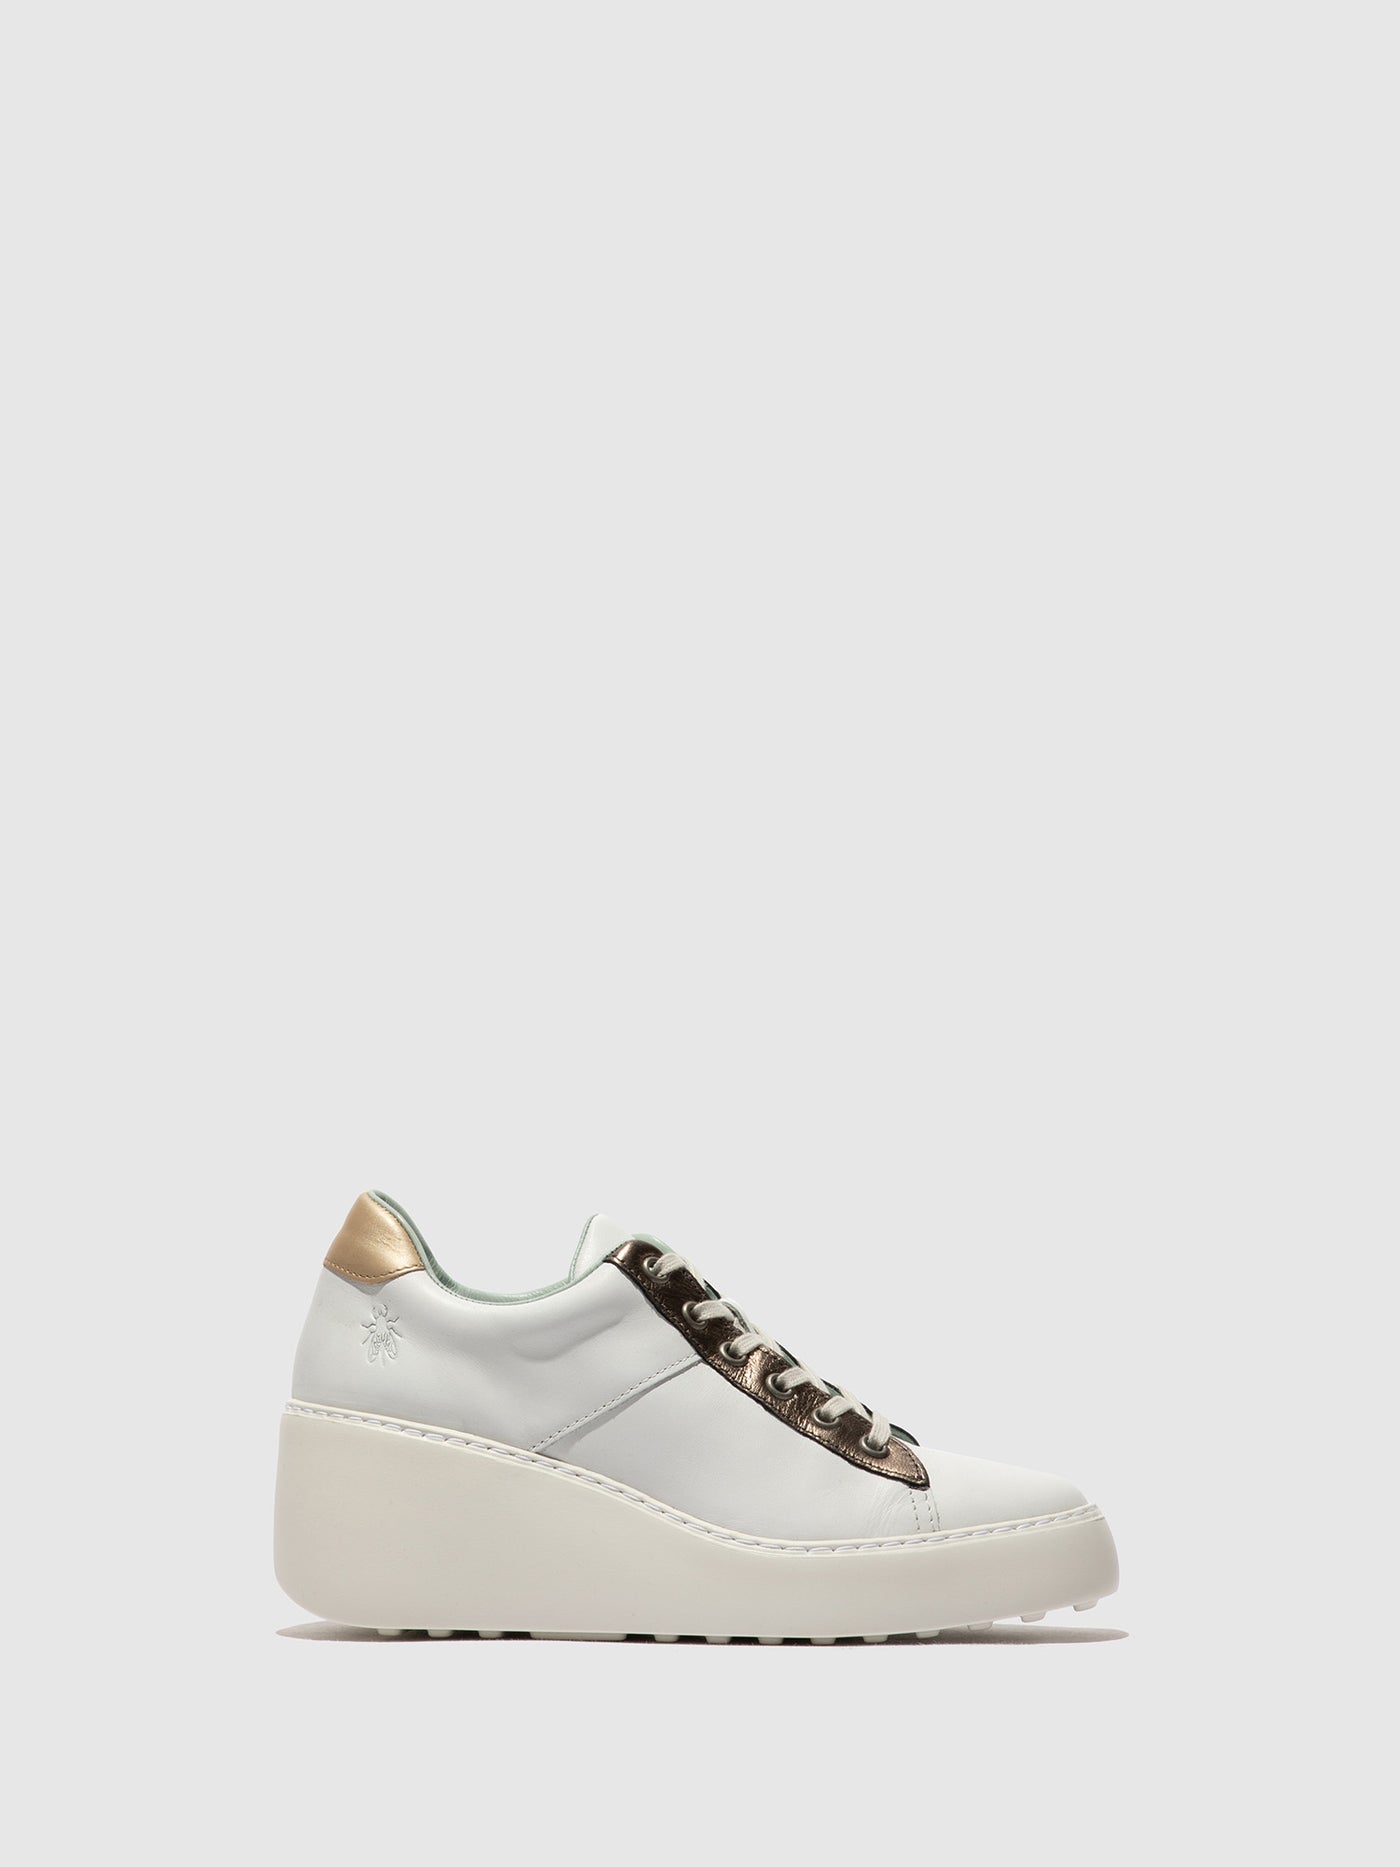 Lace-up Trainers DELF580FLY WHITE/BRONZE GRAPHITE/GOLD